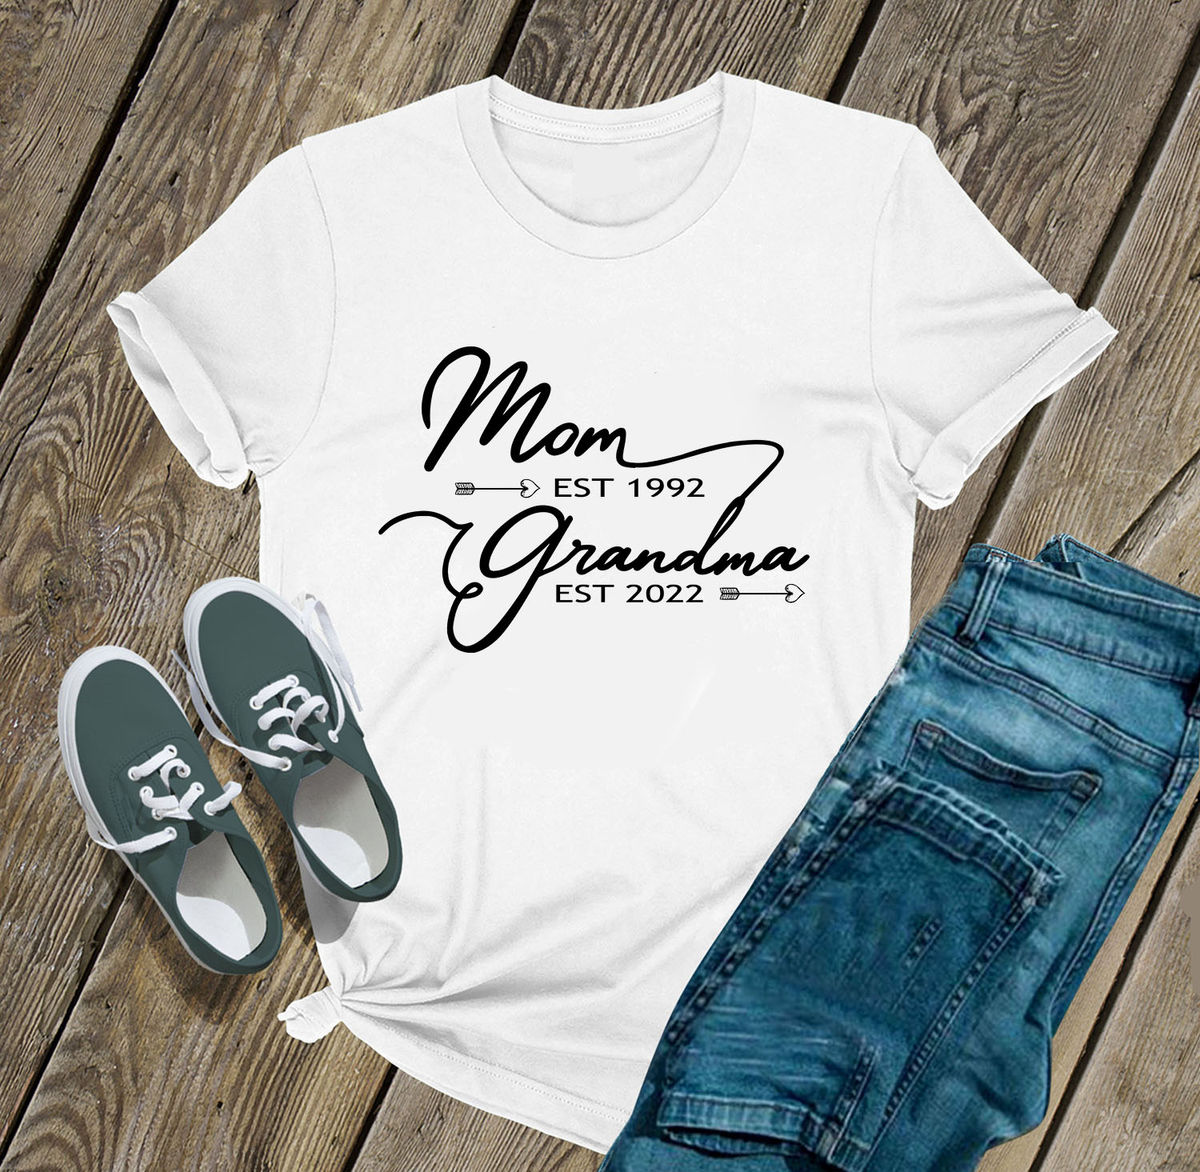 Personalized Mother's Day Shirt, Mom Grandma Shirt, Nana Shirt Gift, Mother Grandma Birthday Gift